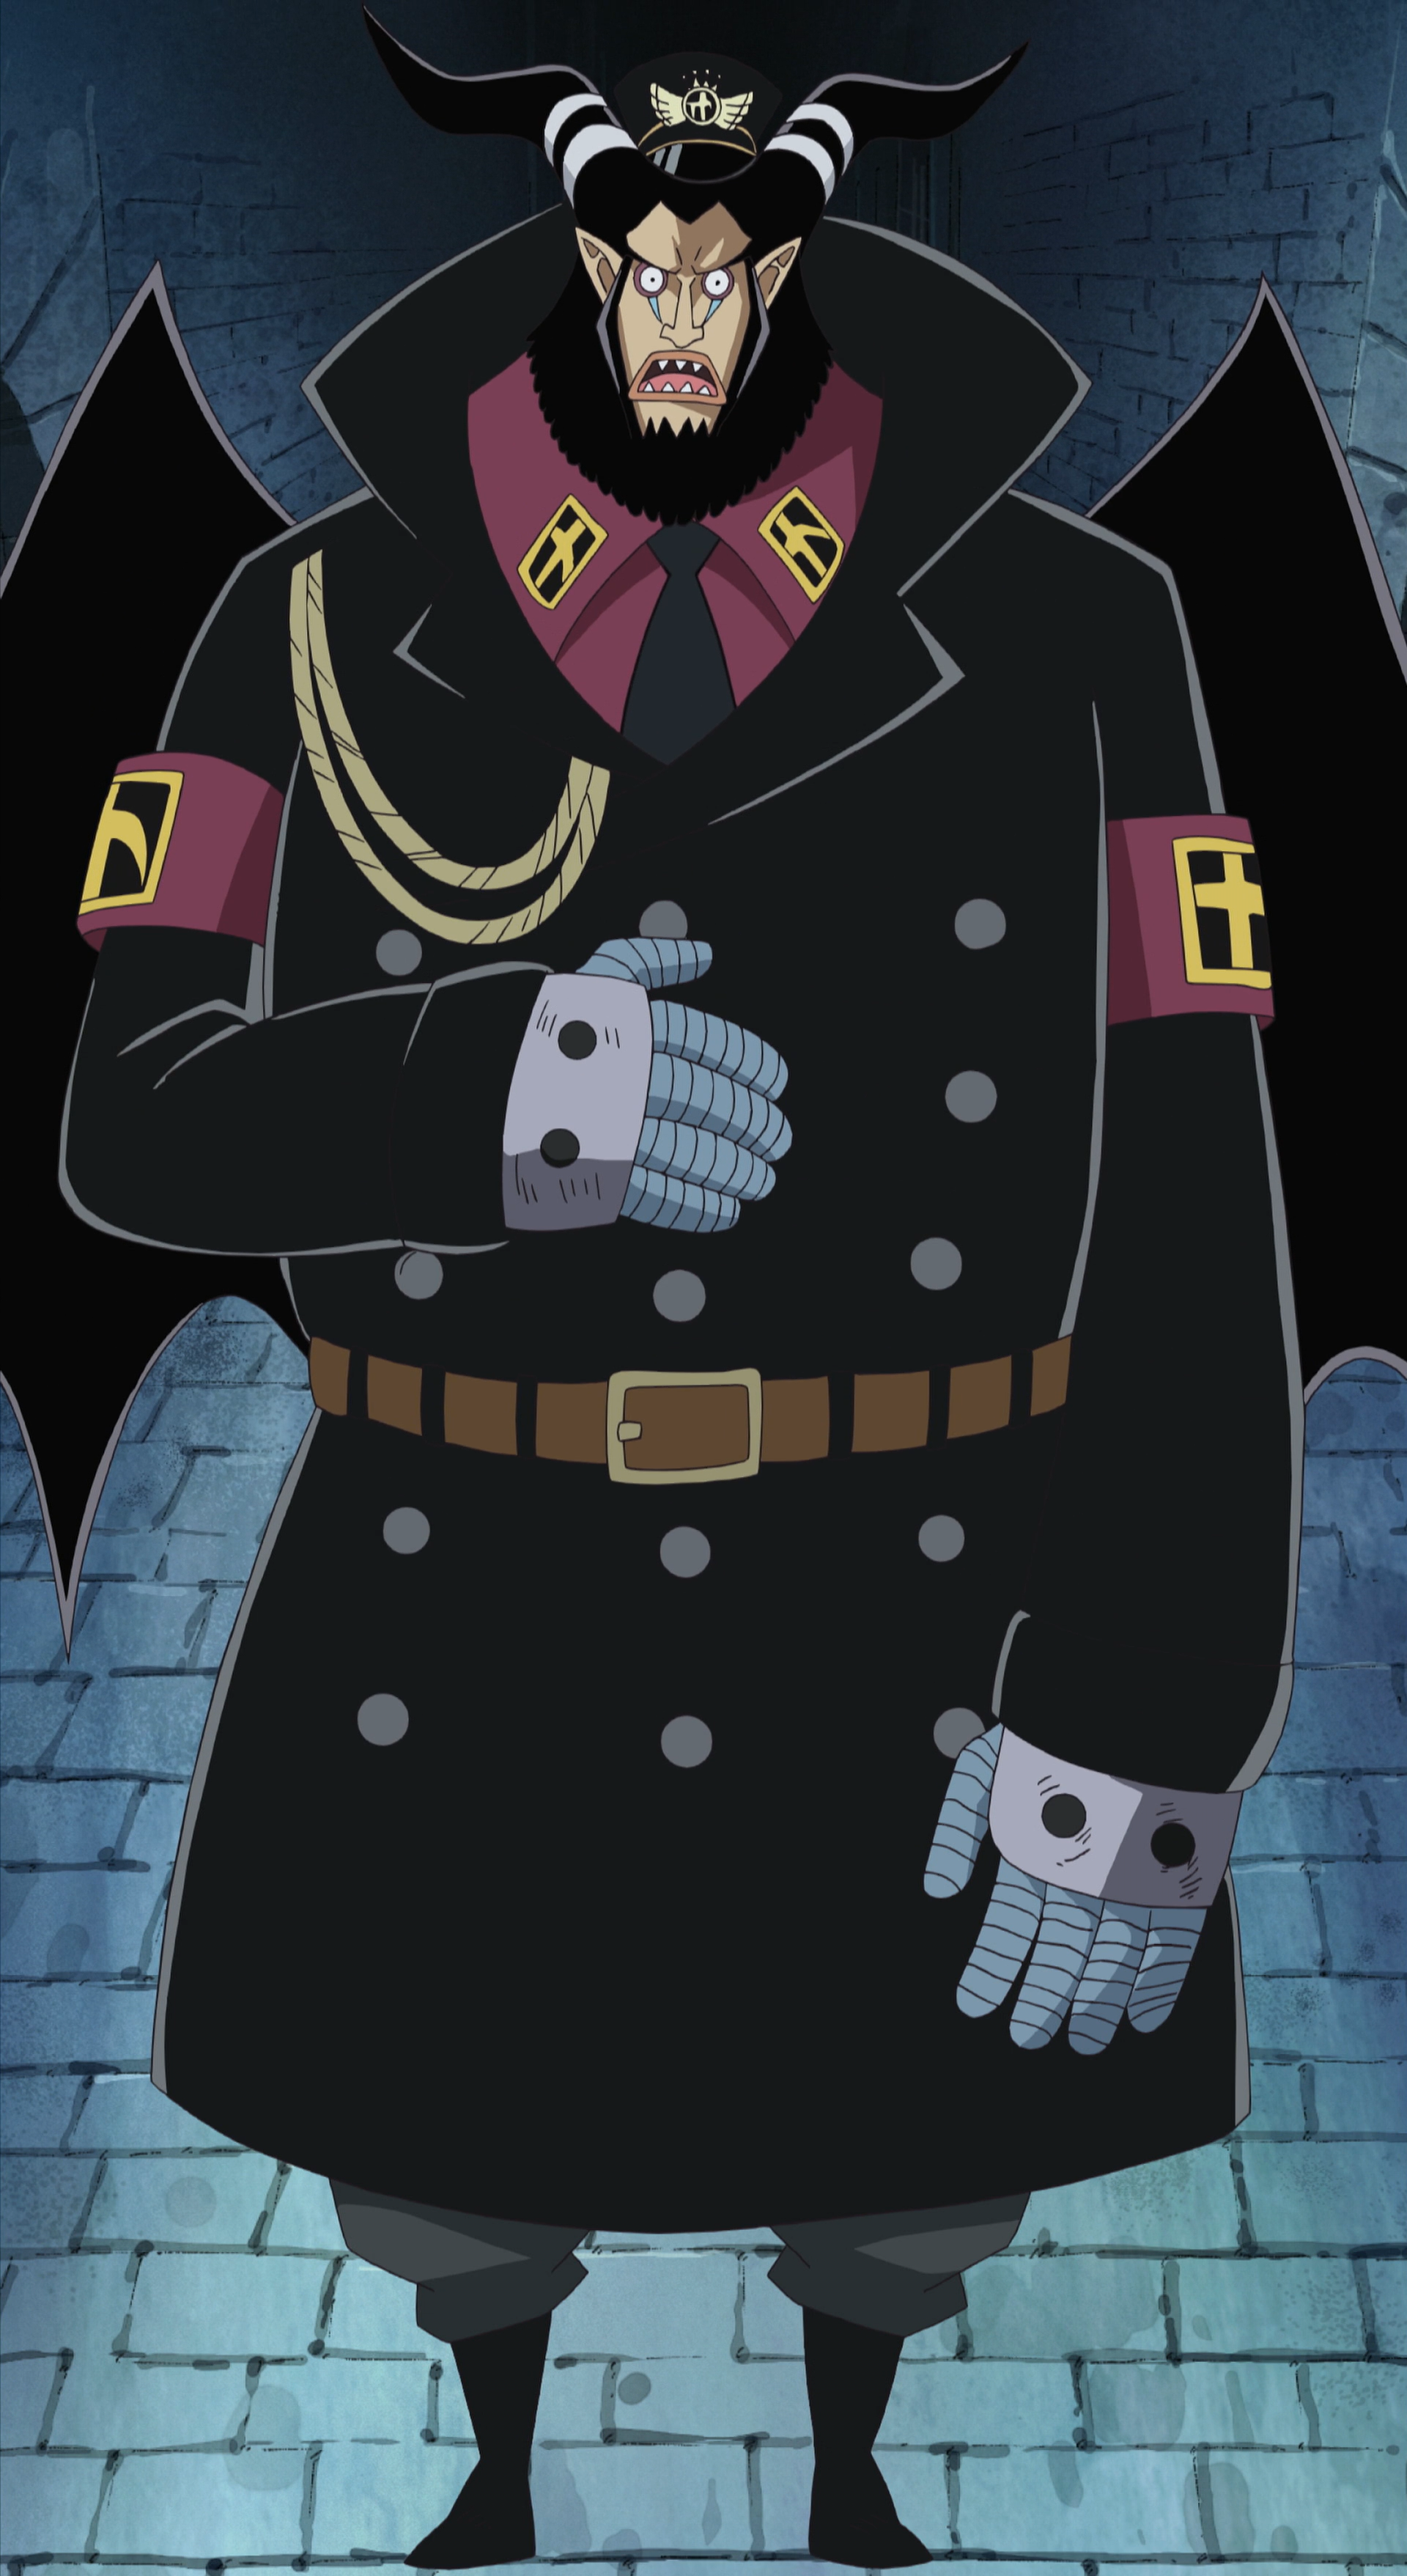 http://vignette4.wikia.nocookie.net/onepiece/images/2/21/Magellan_Anime_Pre_Timeskip_Infobox.png/revision/latest?cb=20140723202333